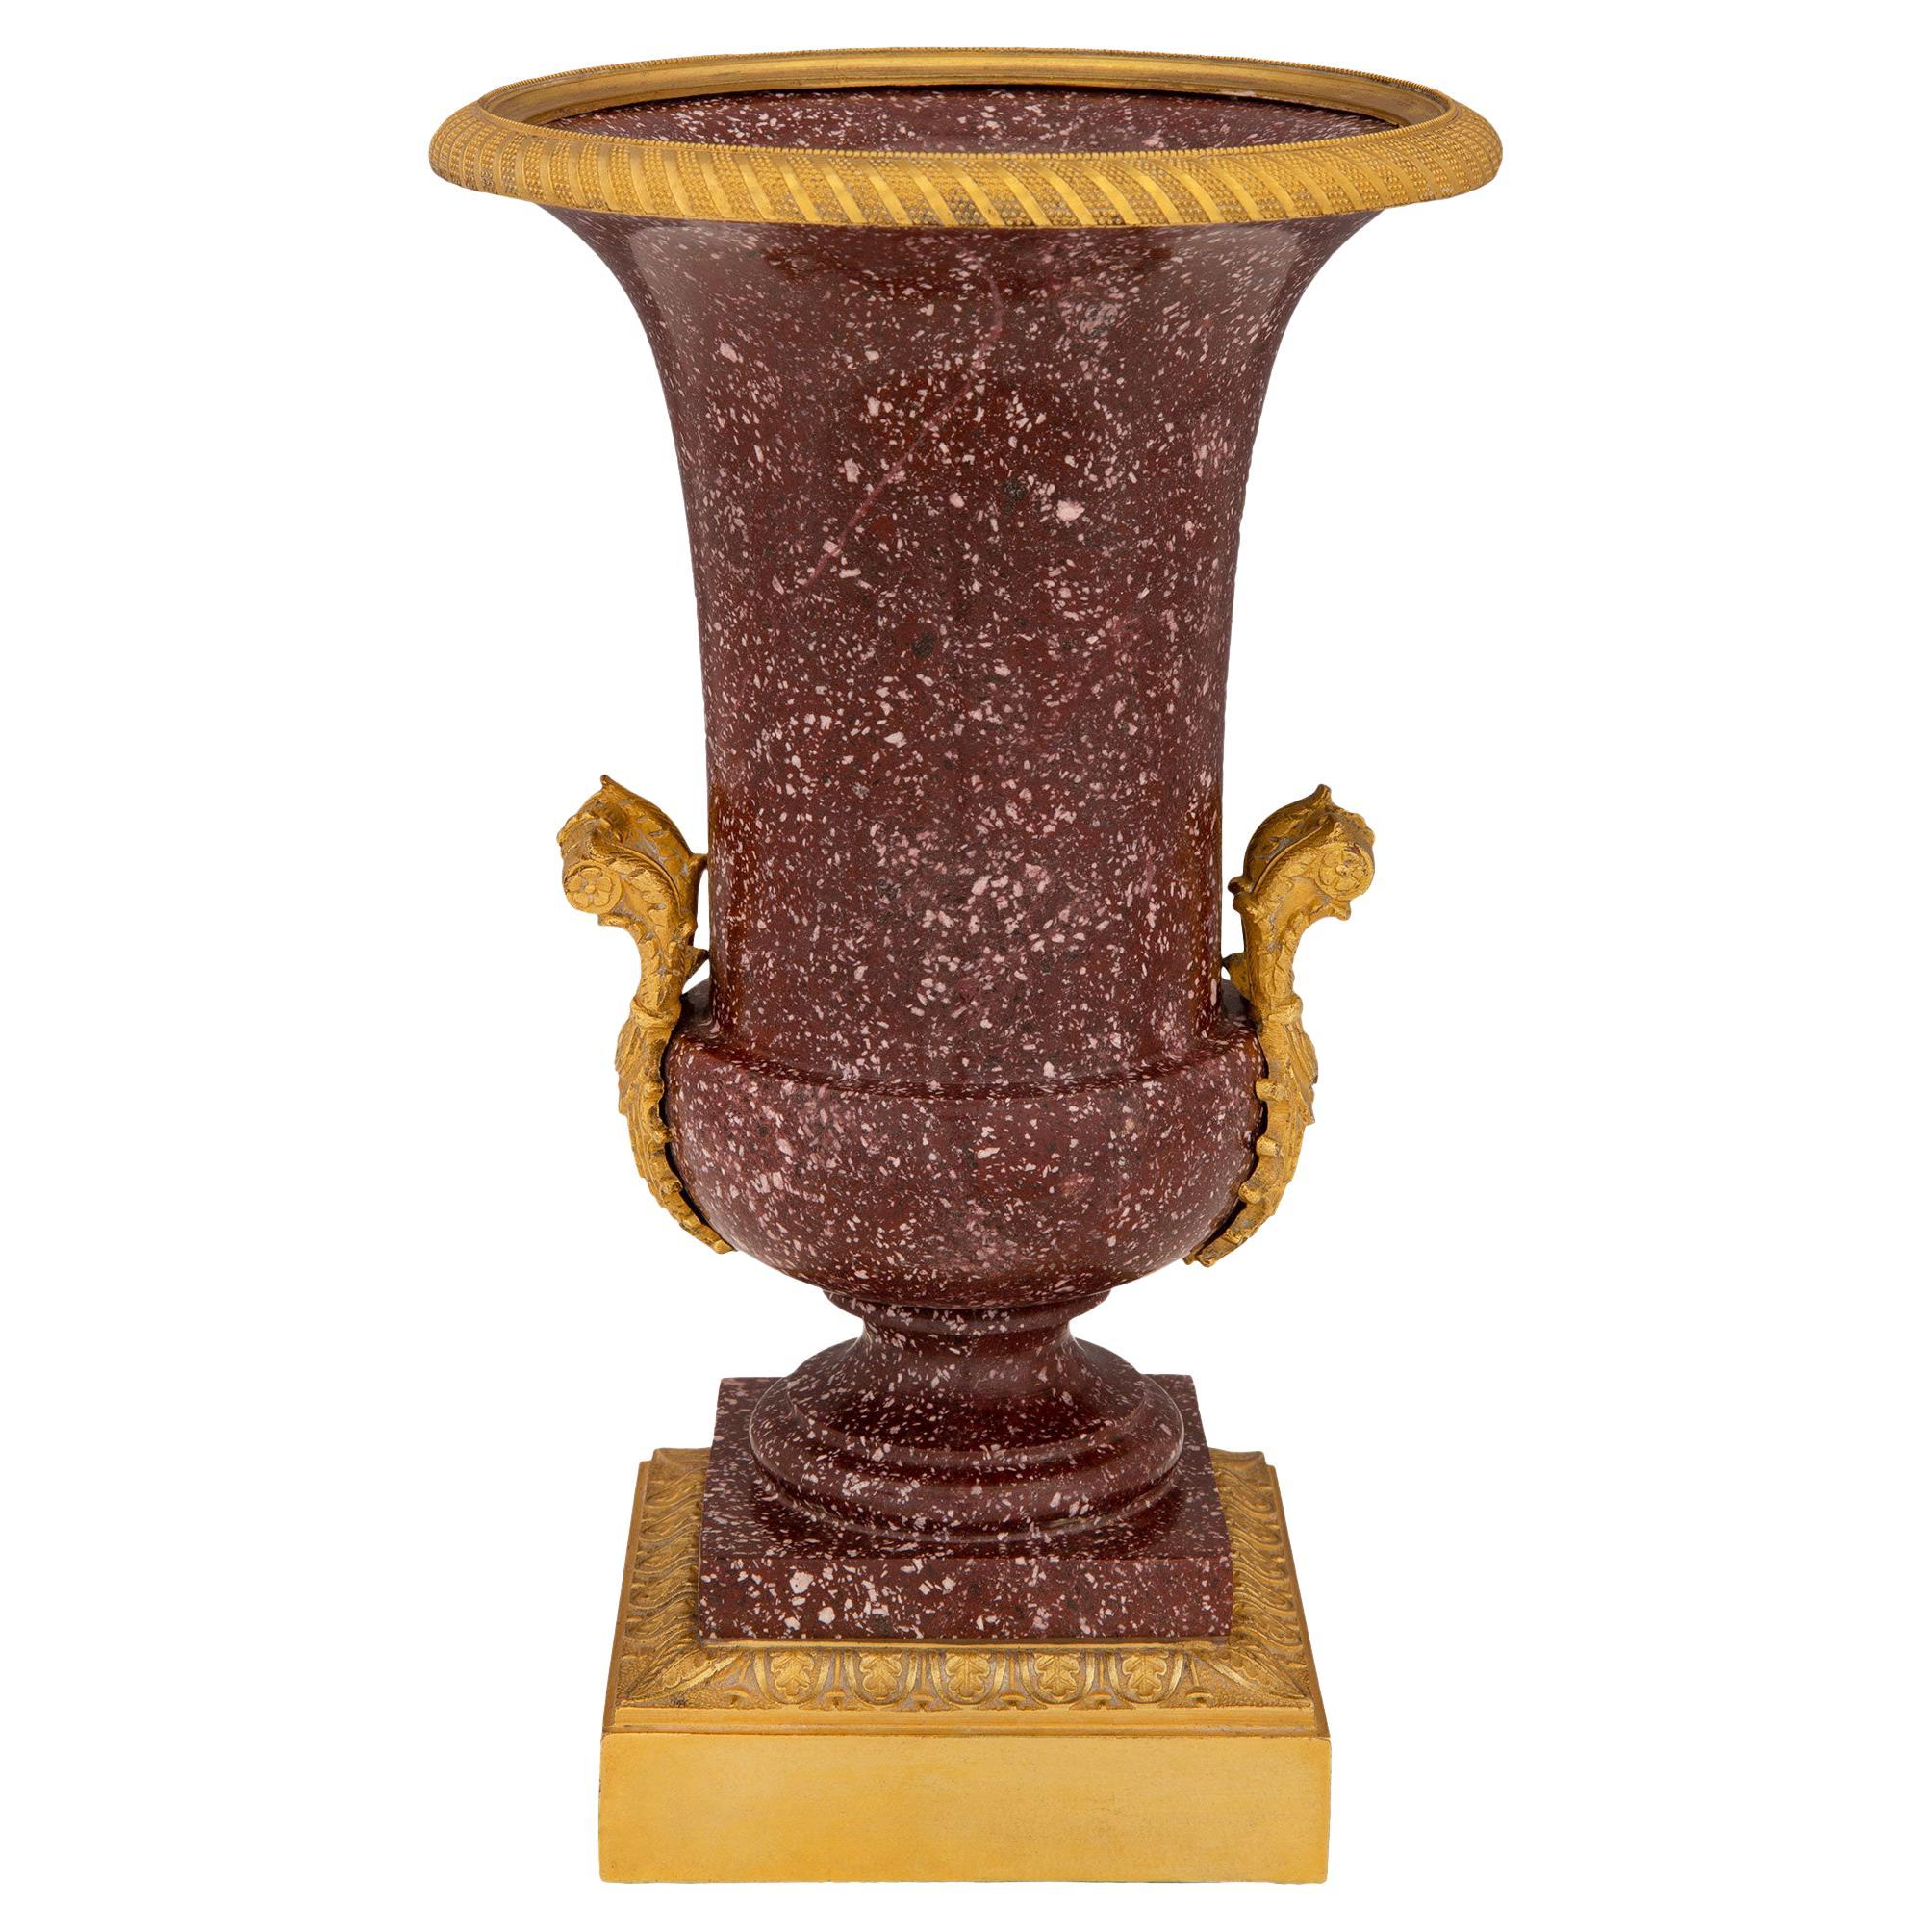  Italian 19th Century Neoclassical Style Imperial Porphyry and Ormolu Urn For Sale